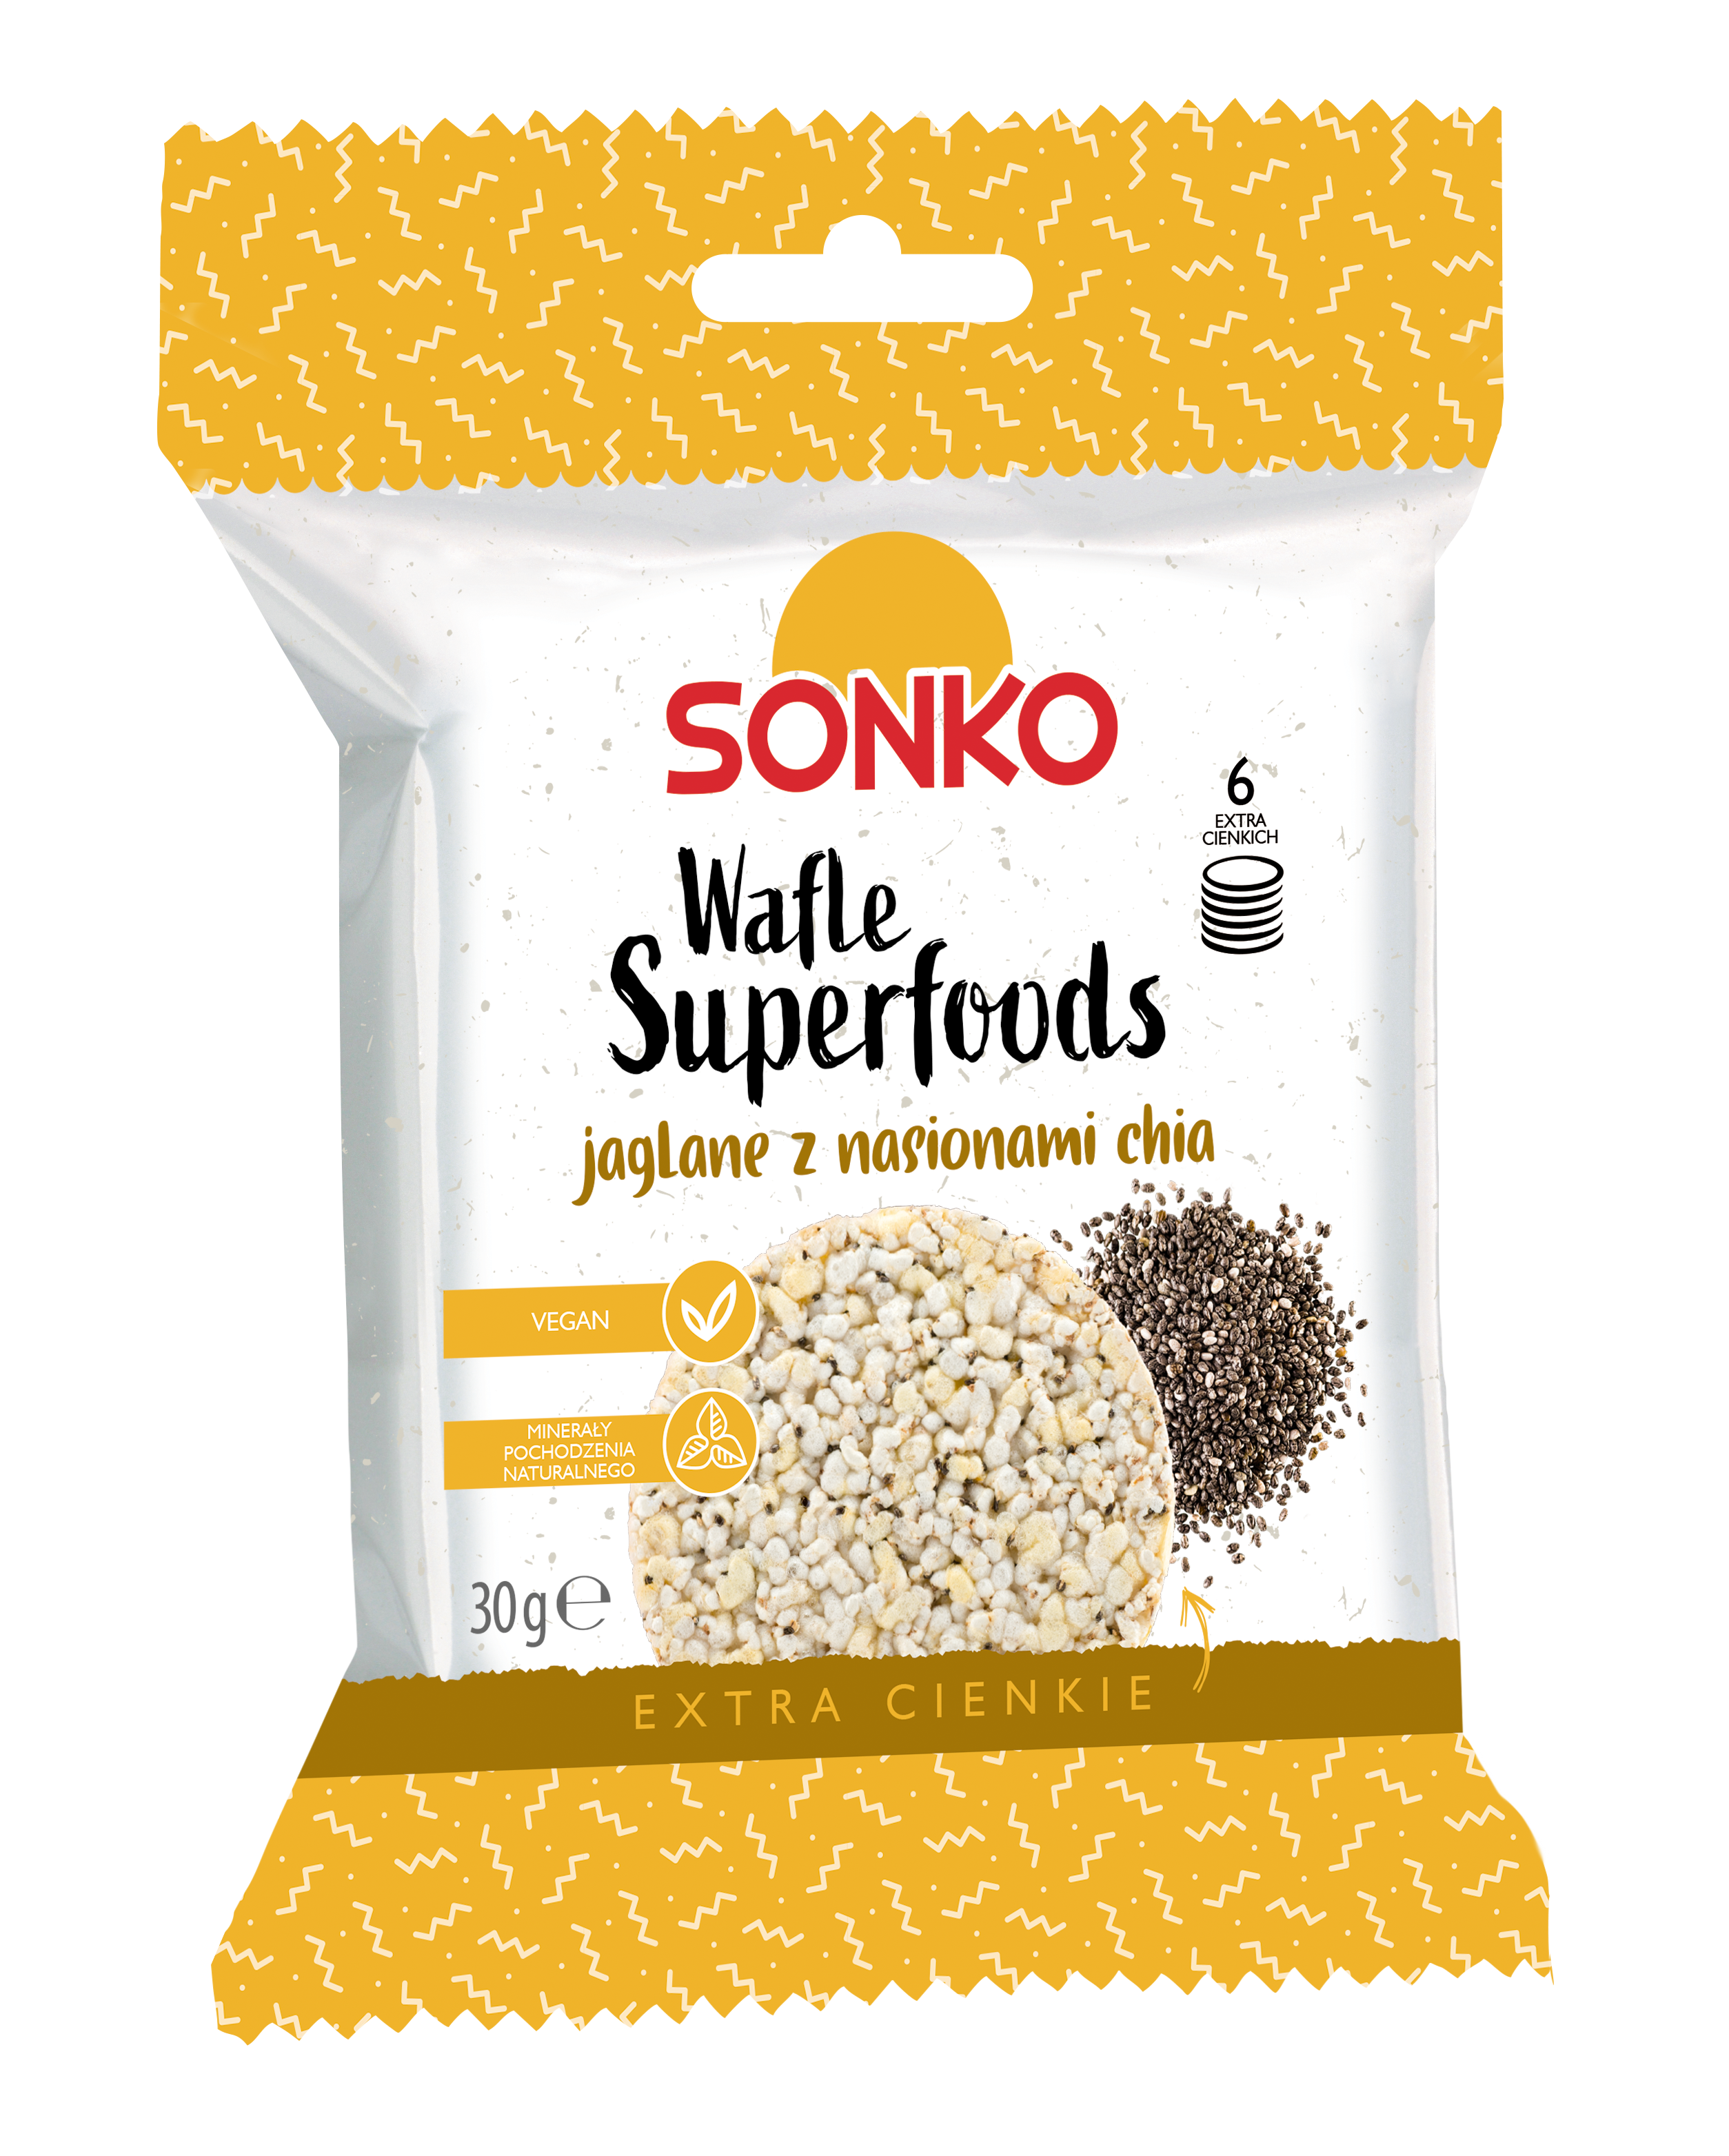 Sonko wafers, millet superfoods + chia seeds